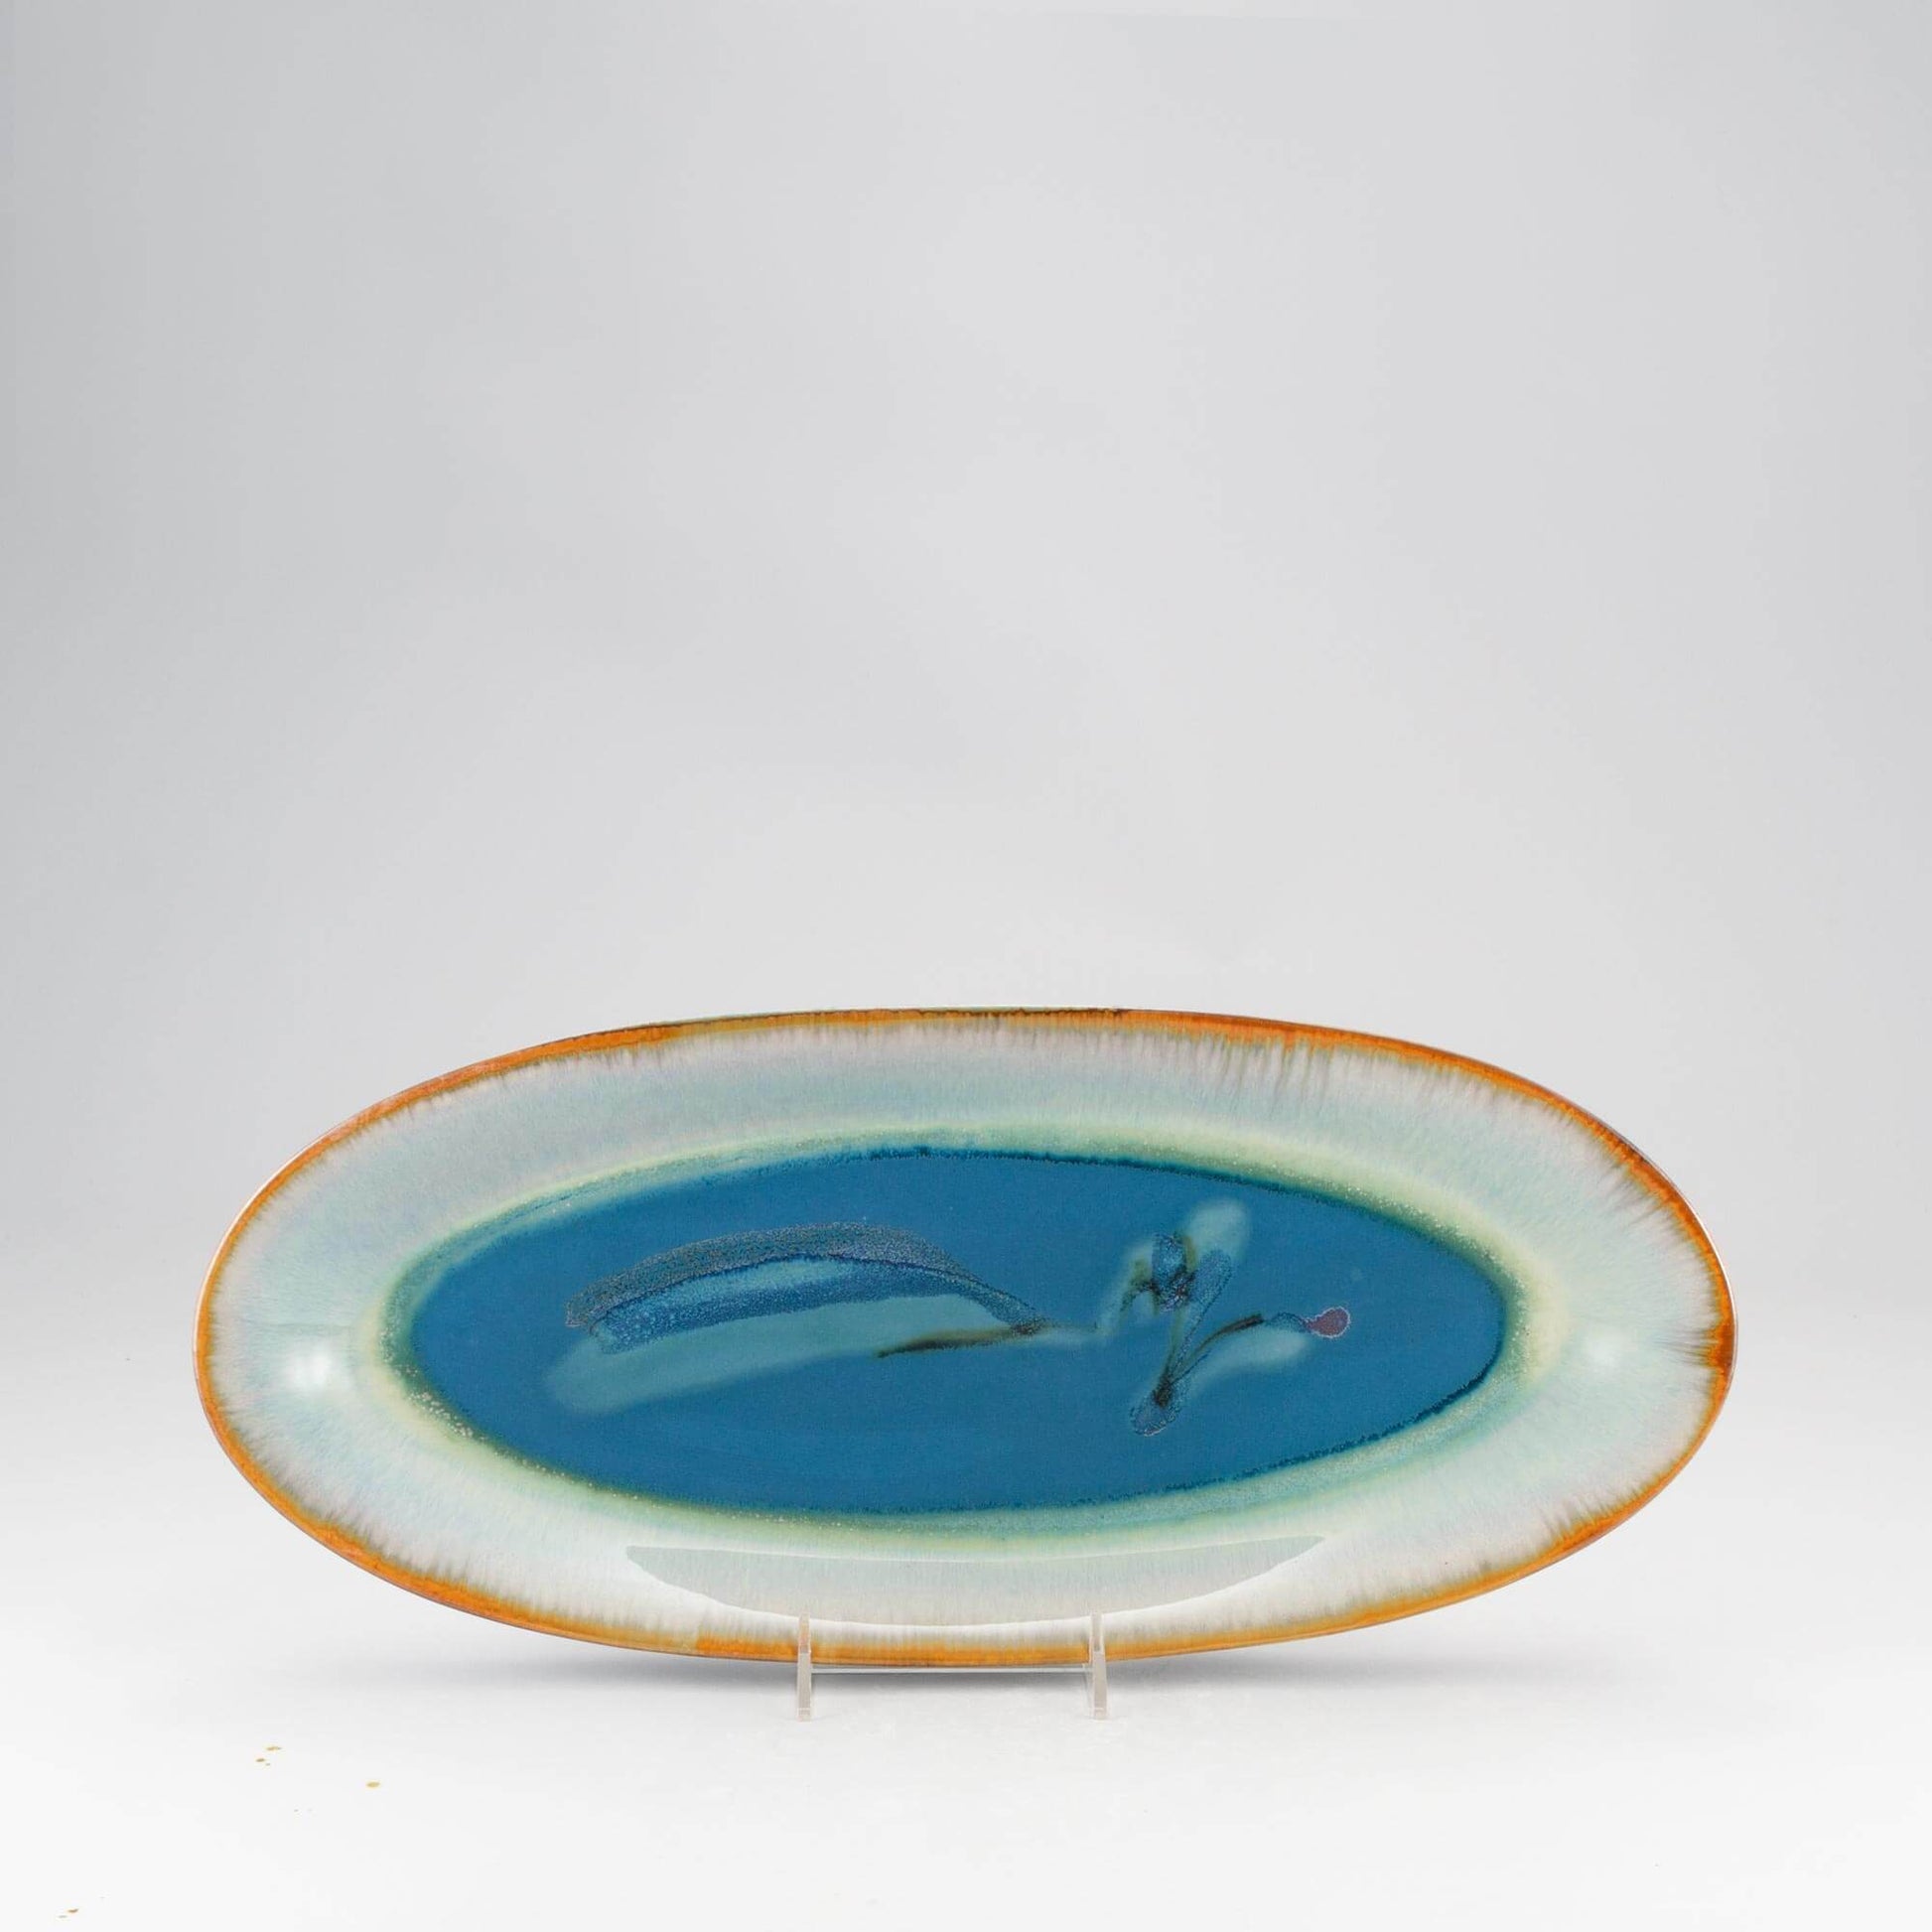 Handmade Pottery Boat Platter made by Georgetown Pottery in Maine